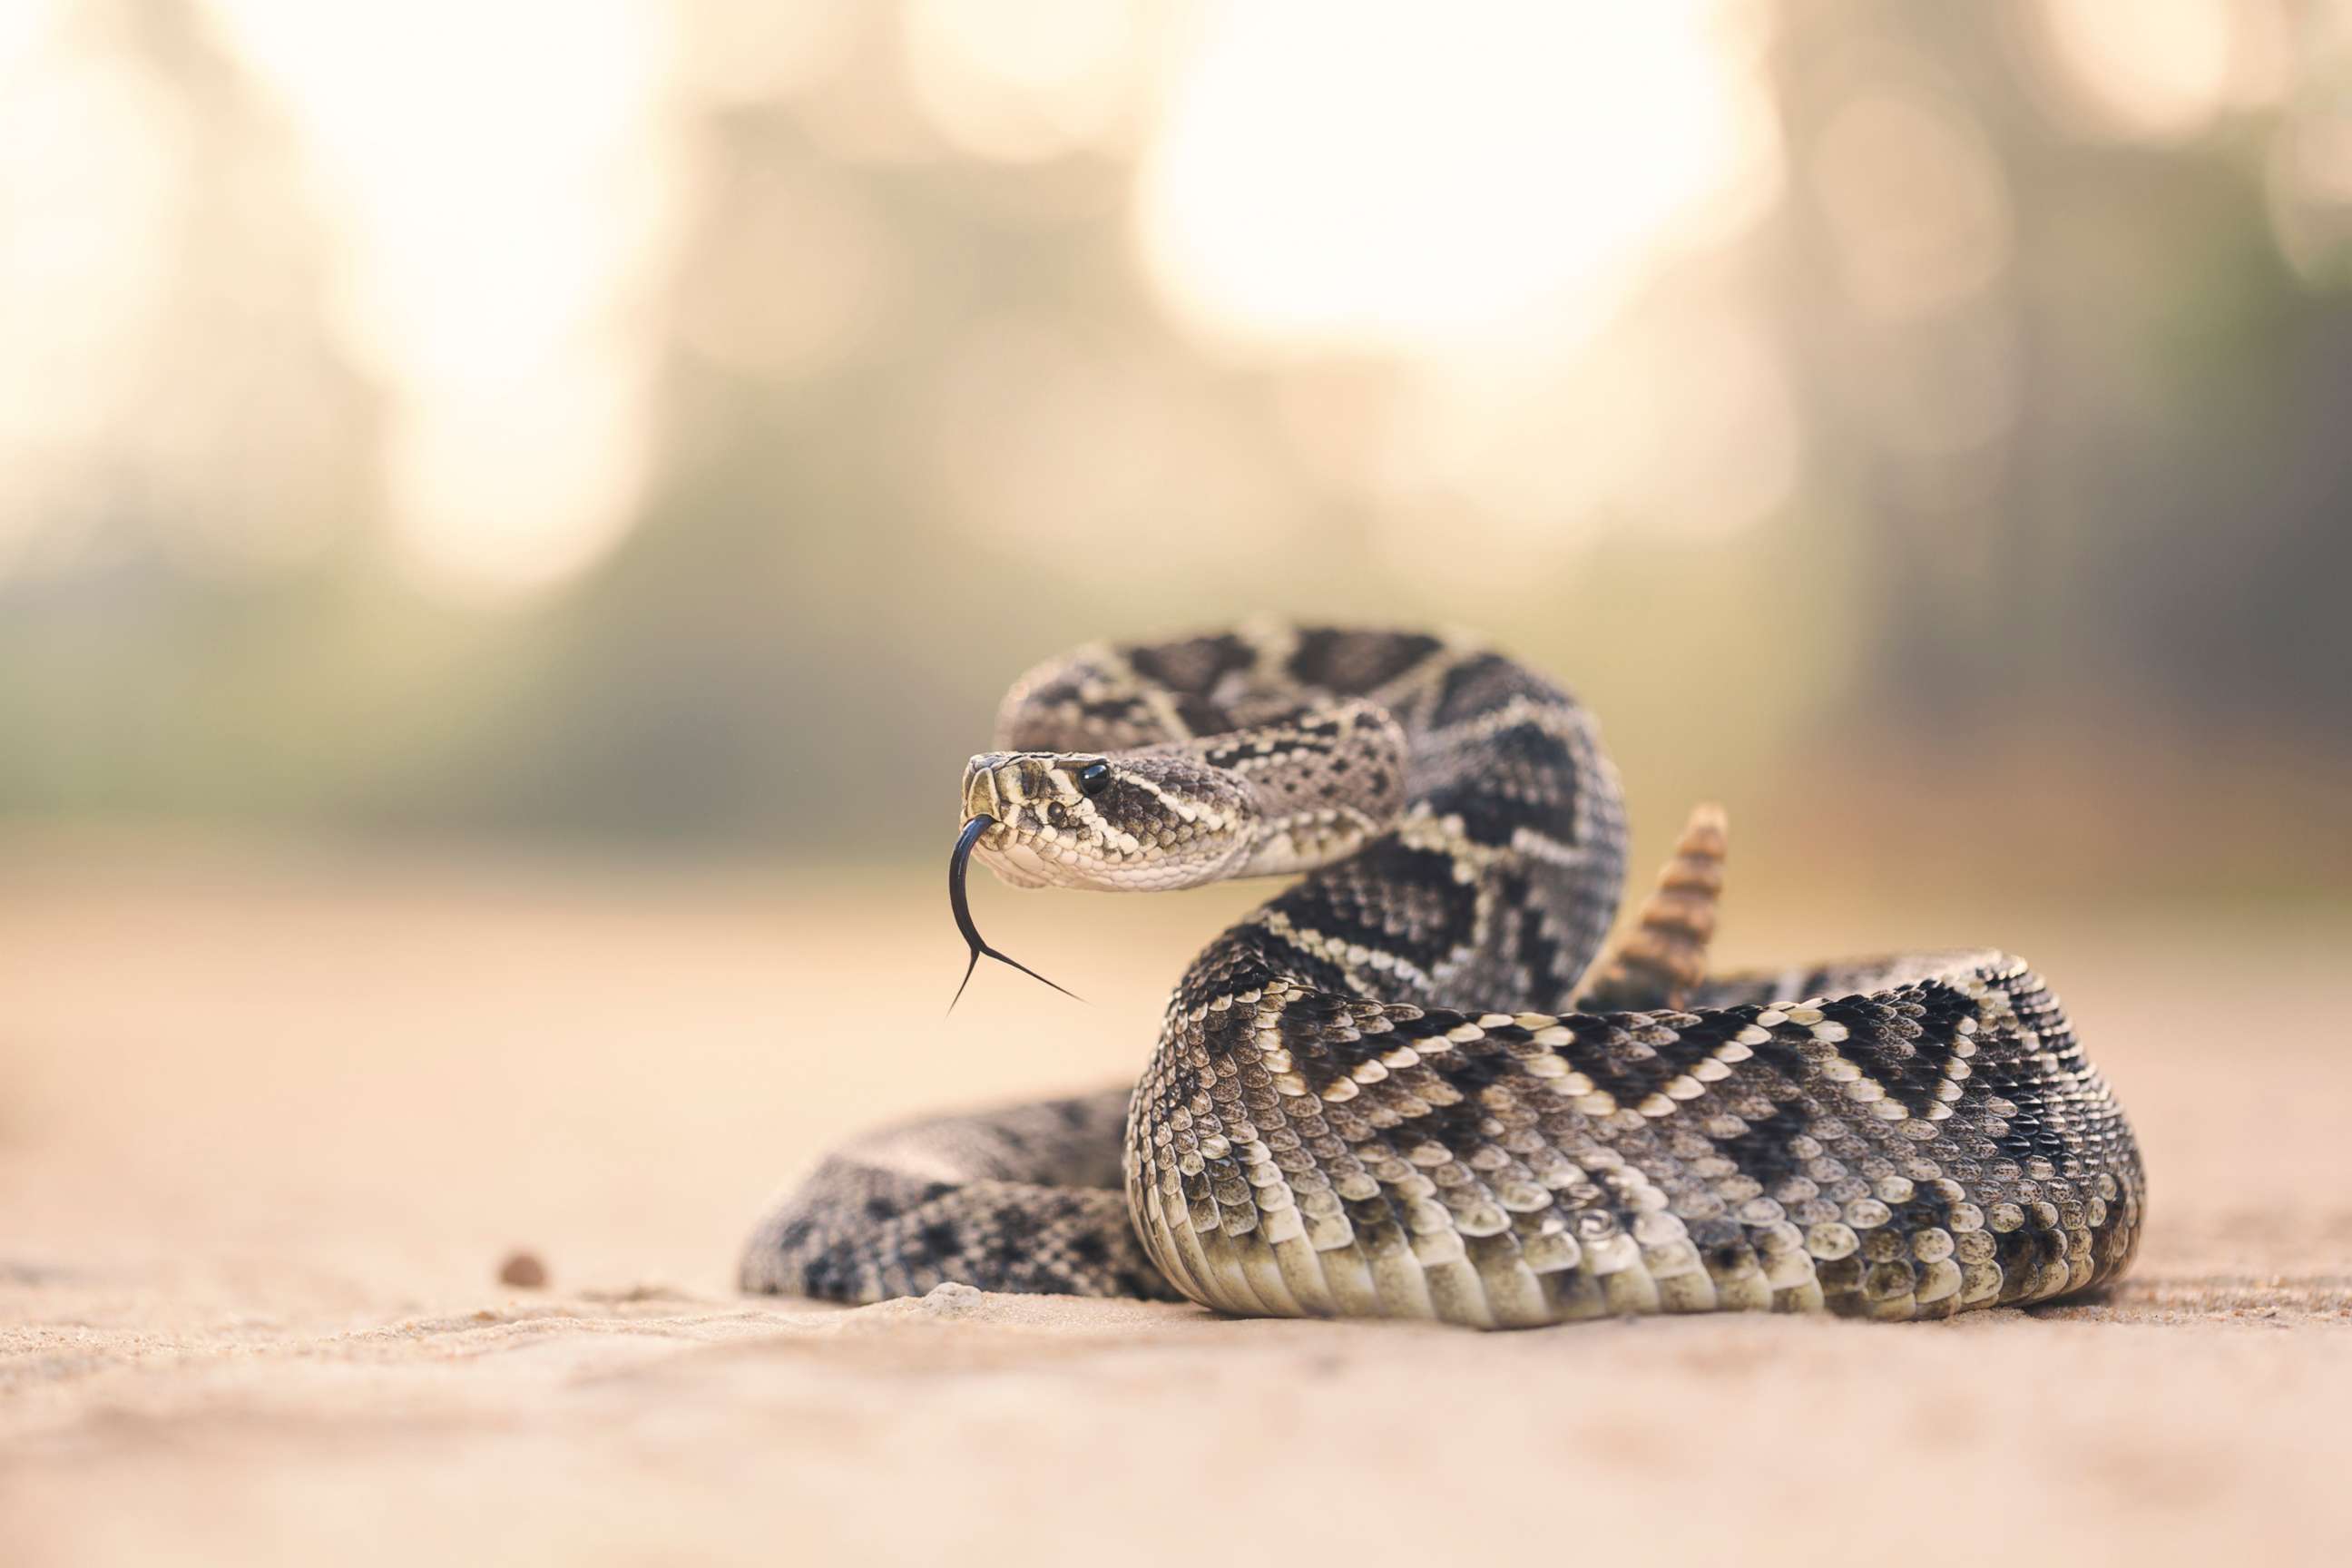 PHOTO: An Eastern Diamondback Rattlesnake assumes a defensive position when disturbed crossing a sand road in Florida.